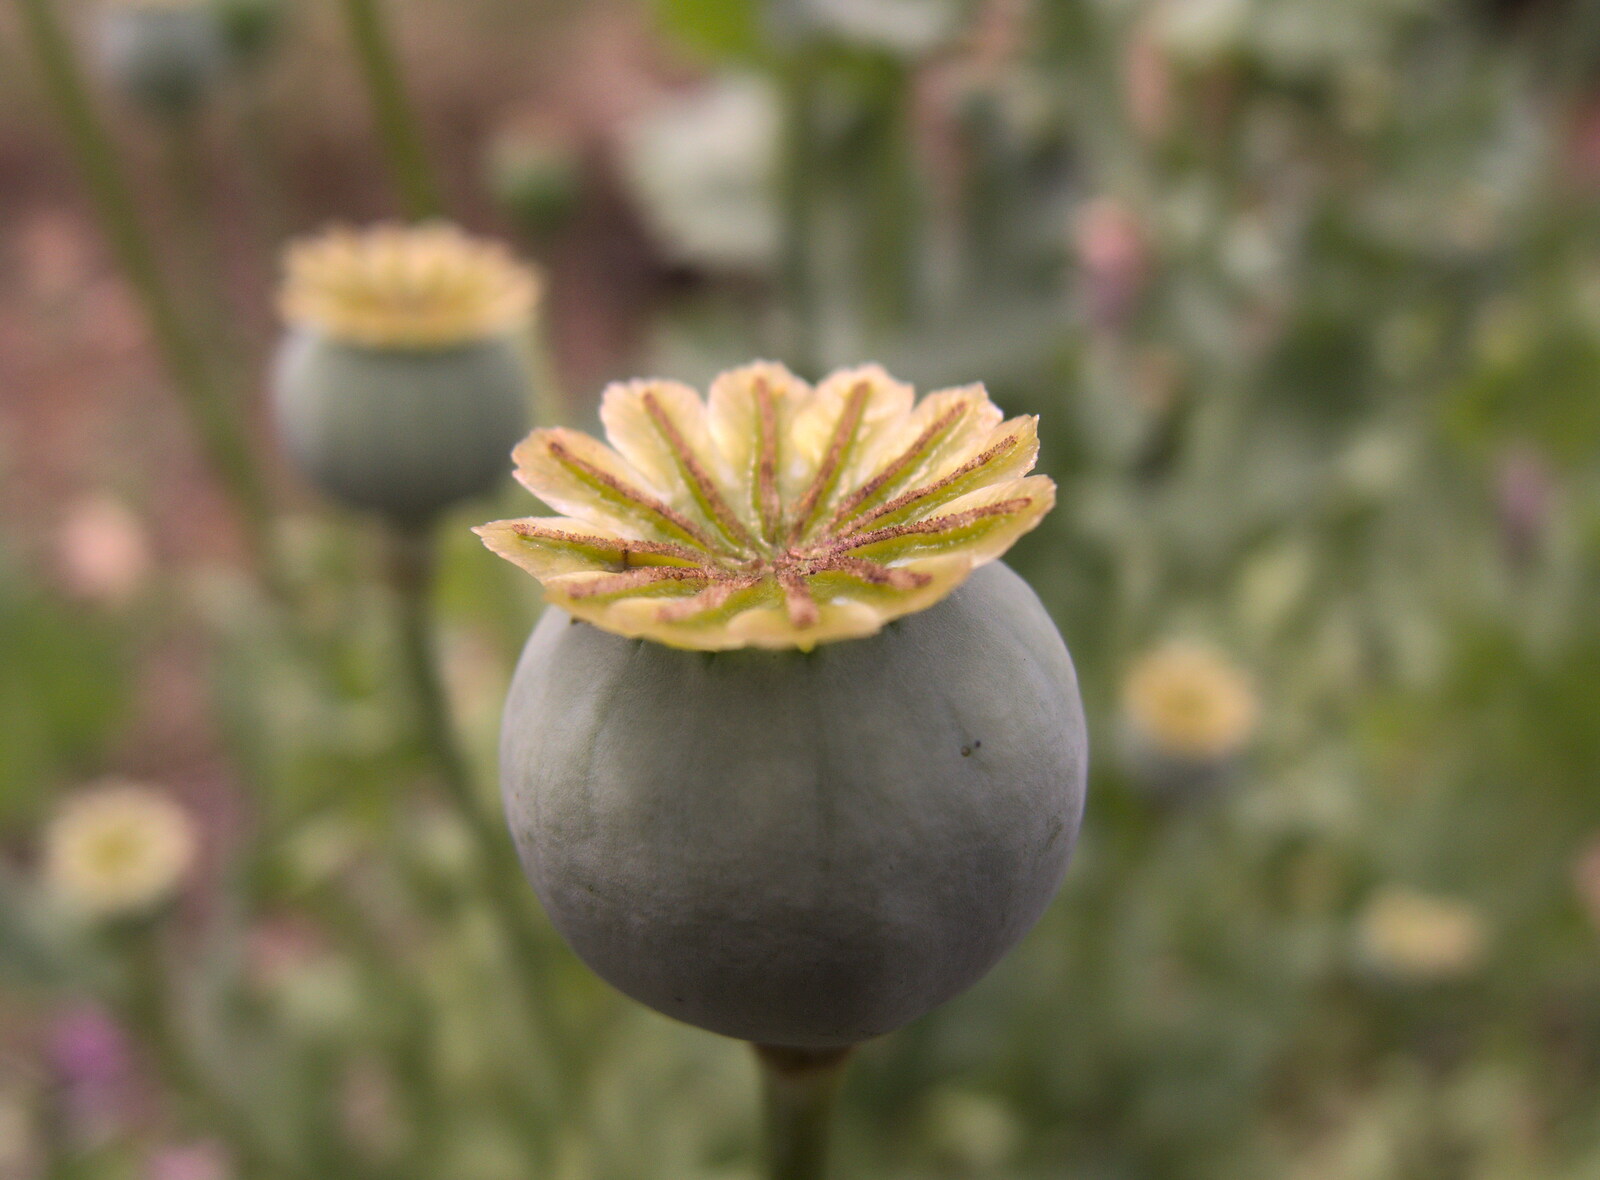 Poppy seed heads, ready to pop from Lockdown Bike Rides and an Anniversary Picnic, Mellis and Brome, Suffolk - 3rd July 2020